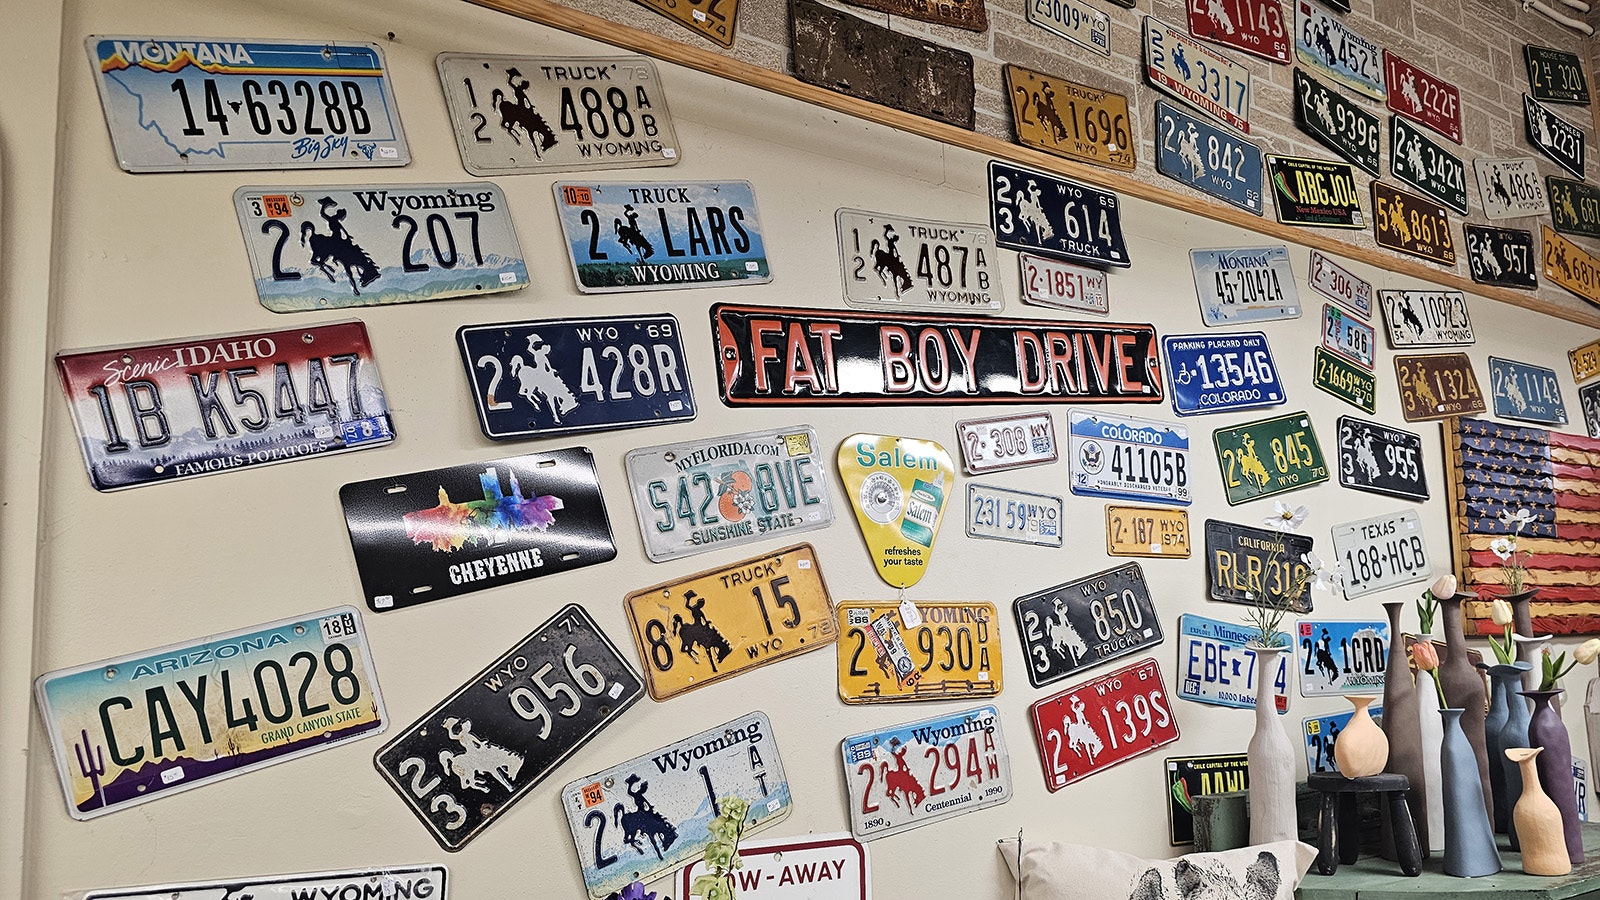 Our Place in Cheyenne sells a wide variety of Wyoming license plates to collectors, many of them international tourists.